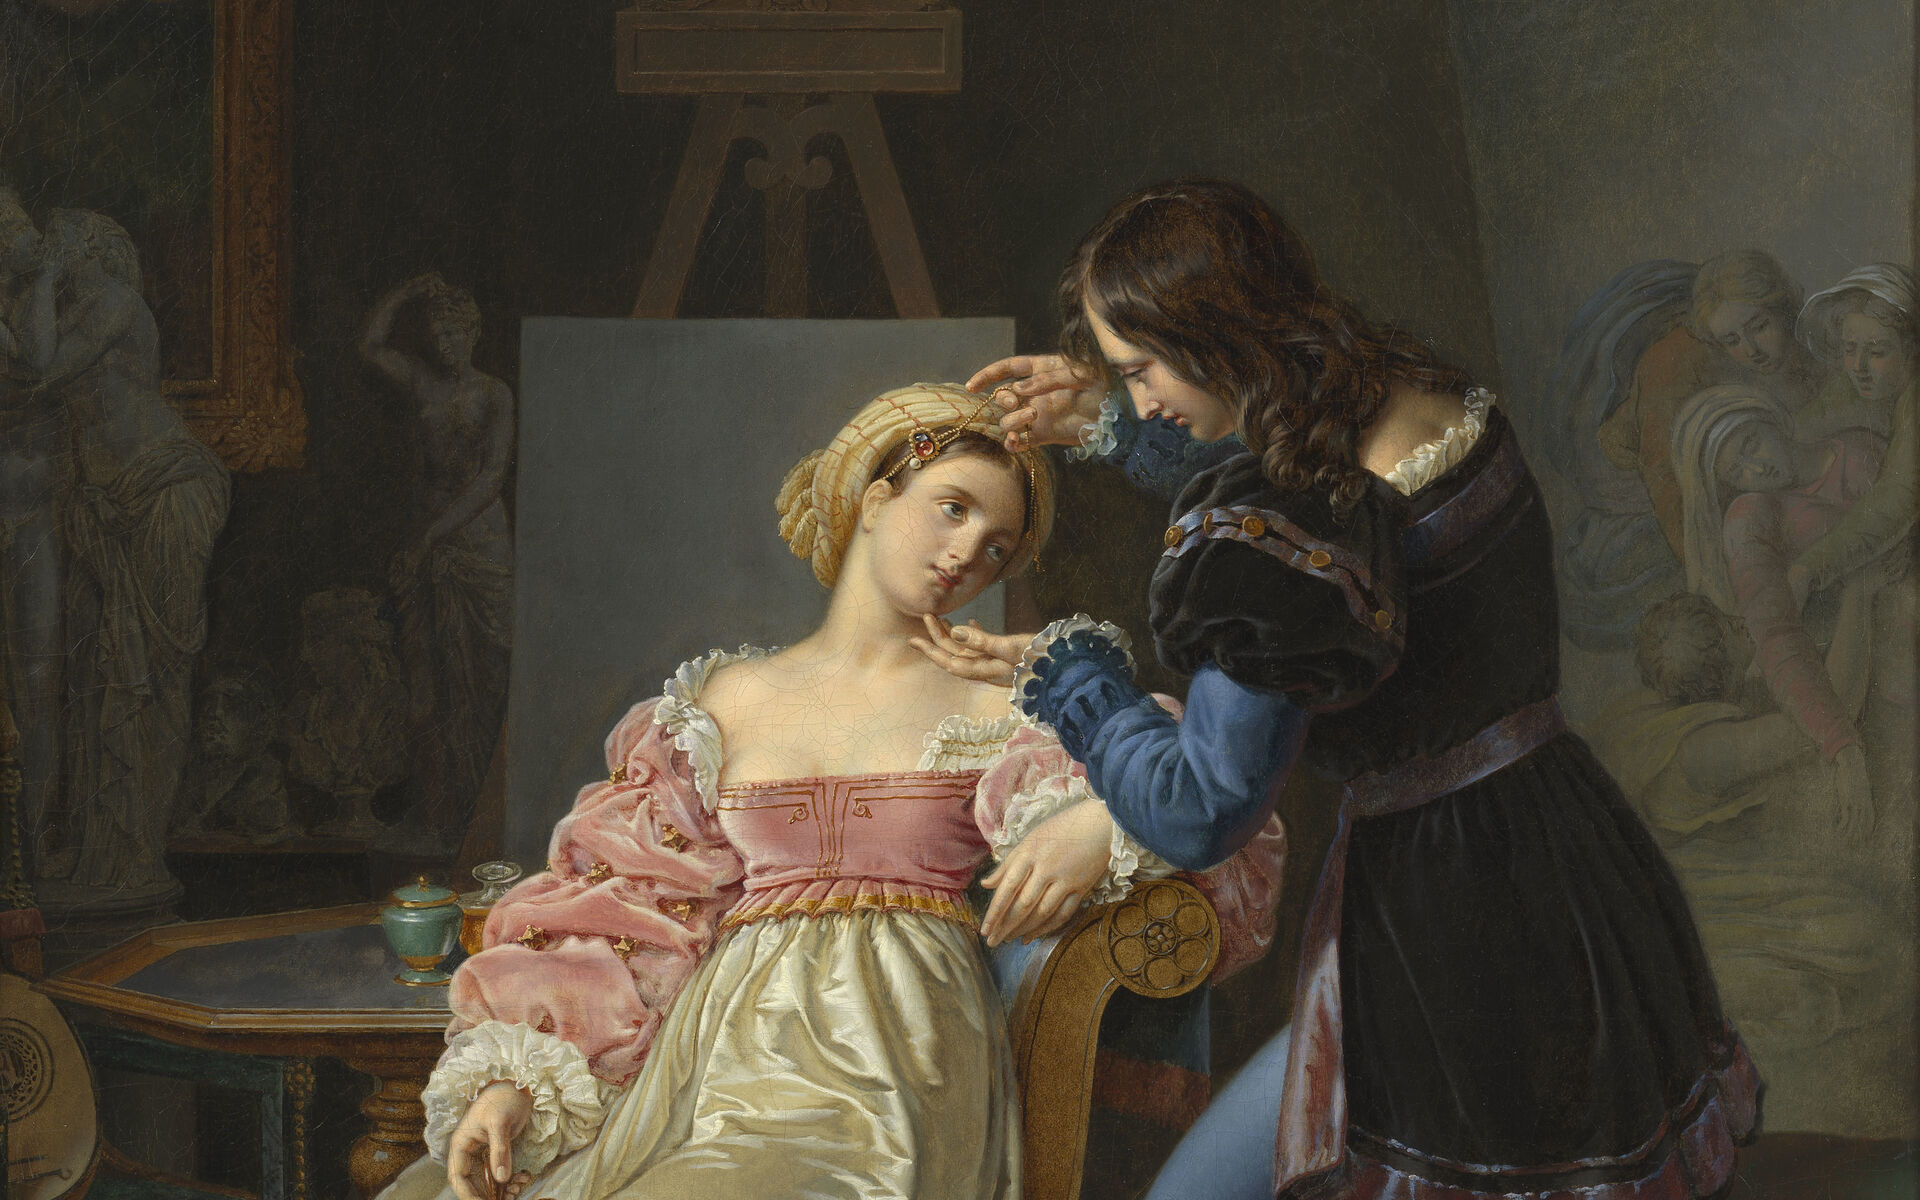 Marie-Philippe Coupin de la Couperie, Raphael Adjusts Fornarina’s Hair Before Painting her Portrait. Painted in 1824, oil on canvas. Nationalmuseum.